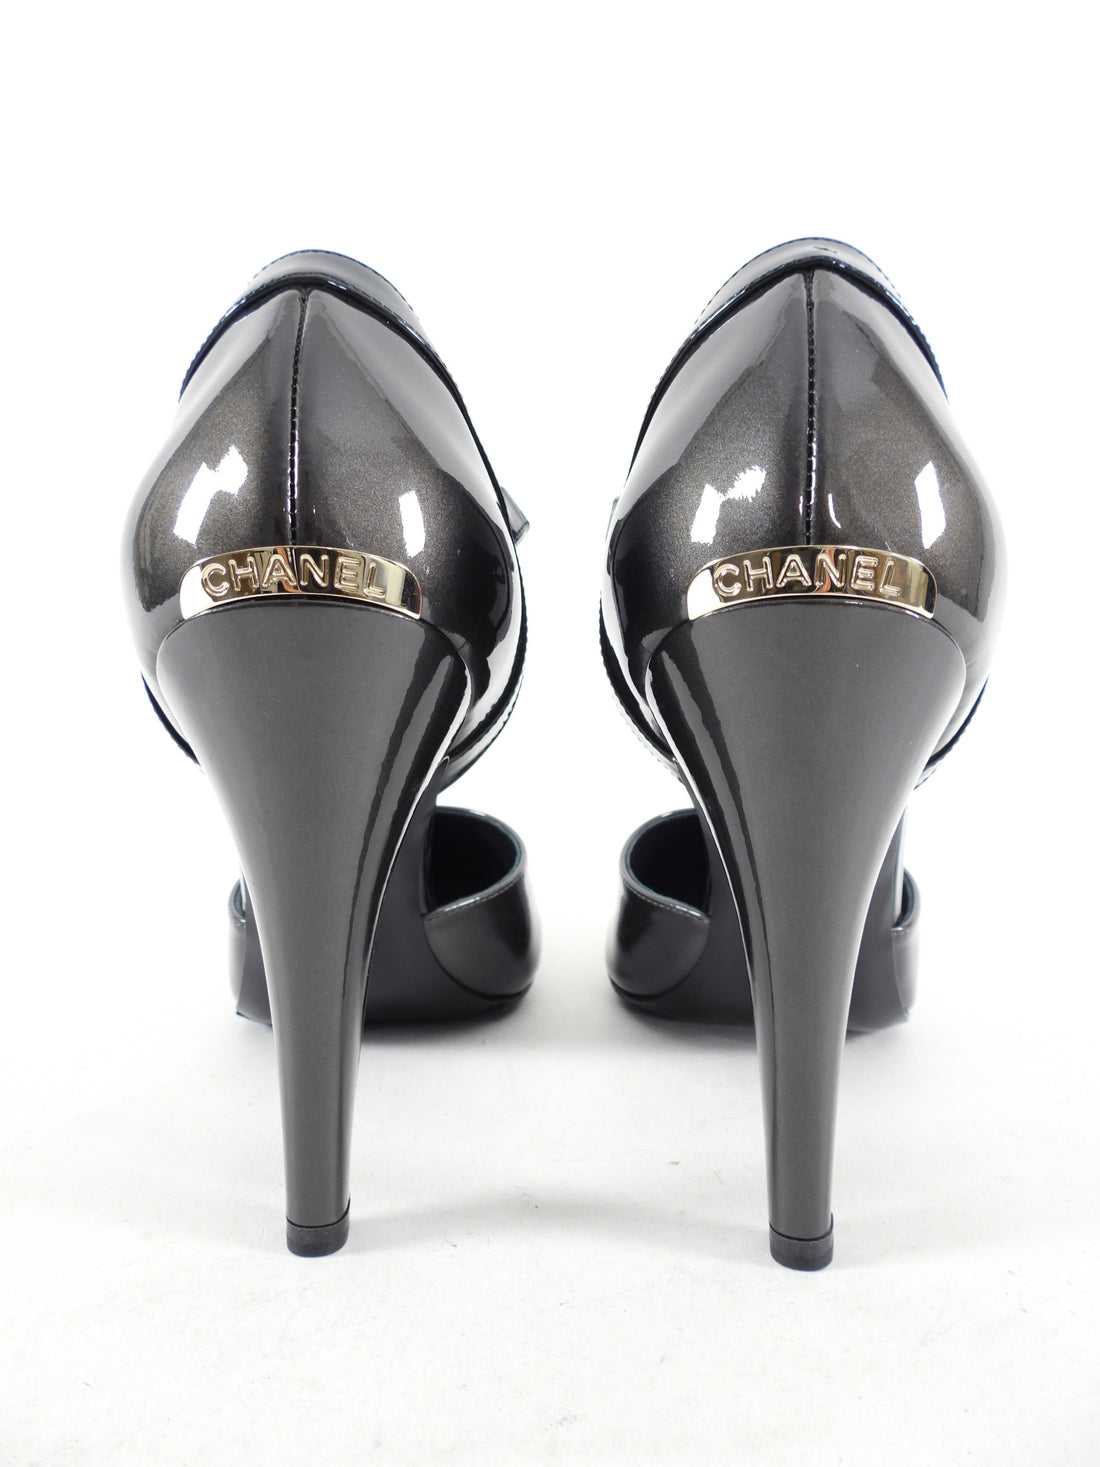 Chanel Grey and Black Two Tone Patent D’Orsay Heels - 41 / 40